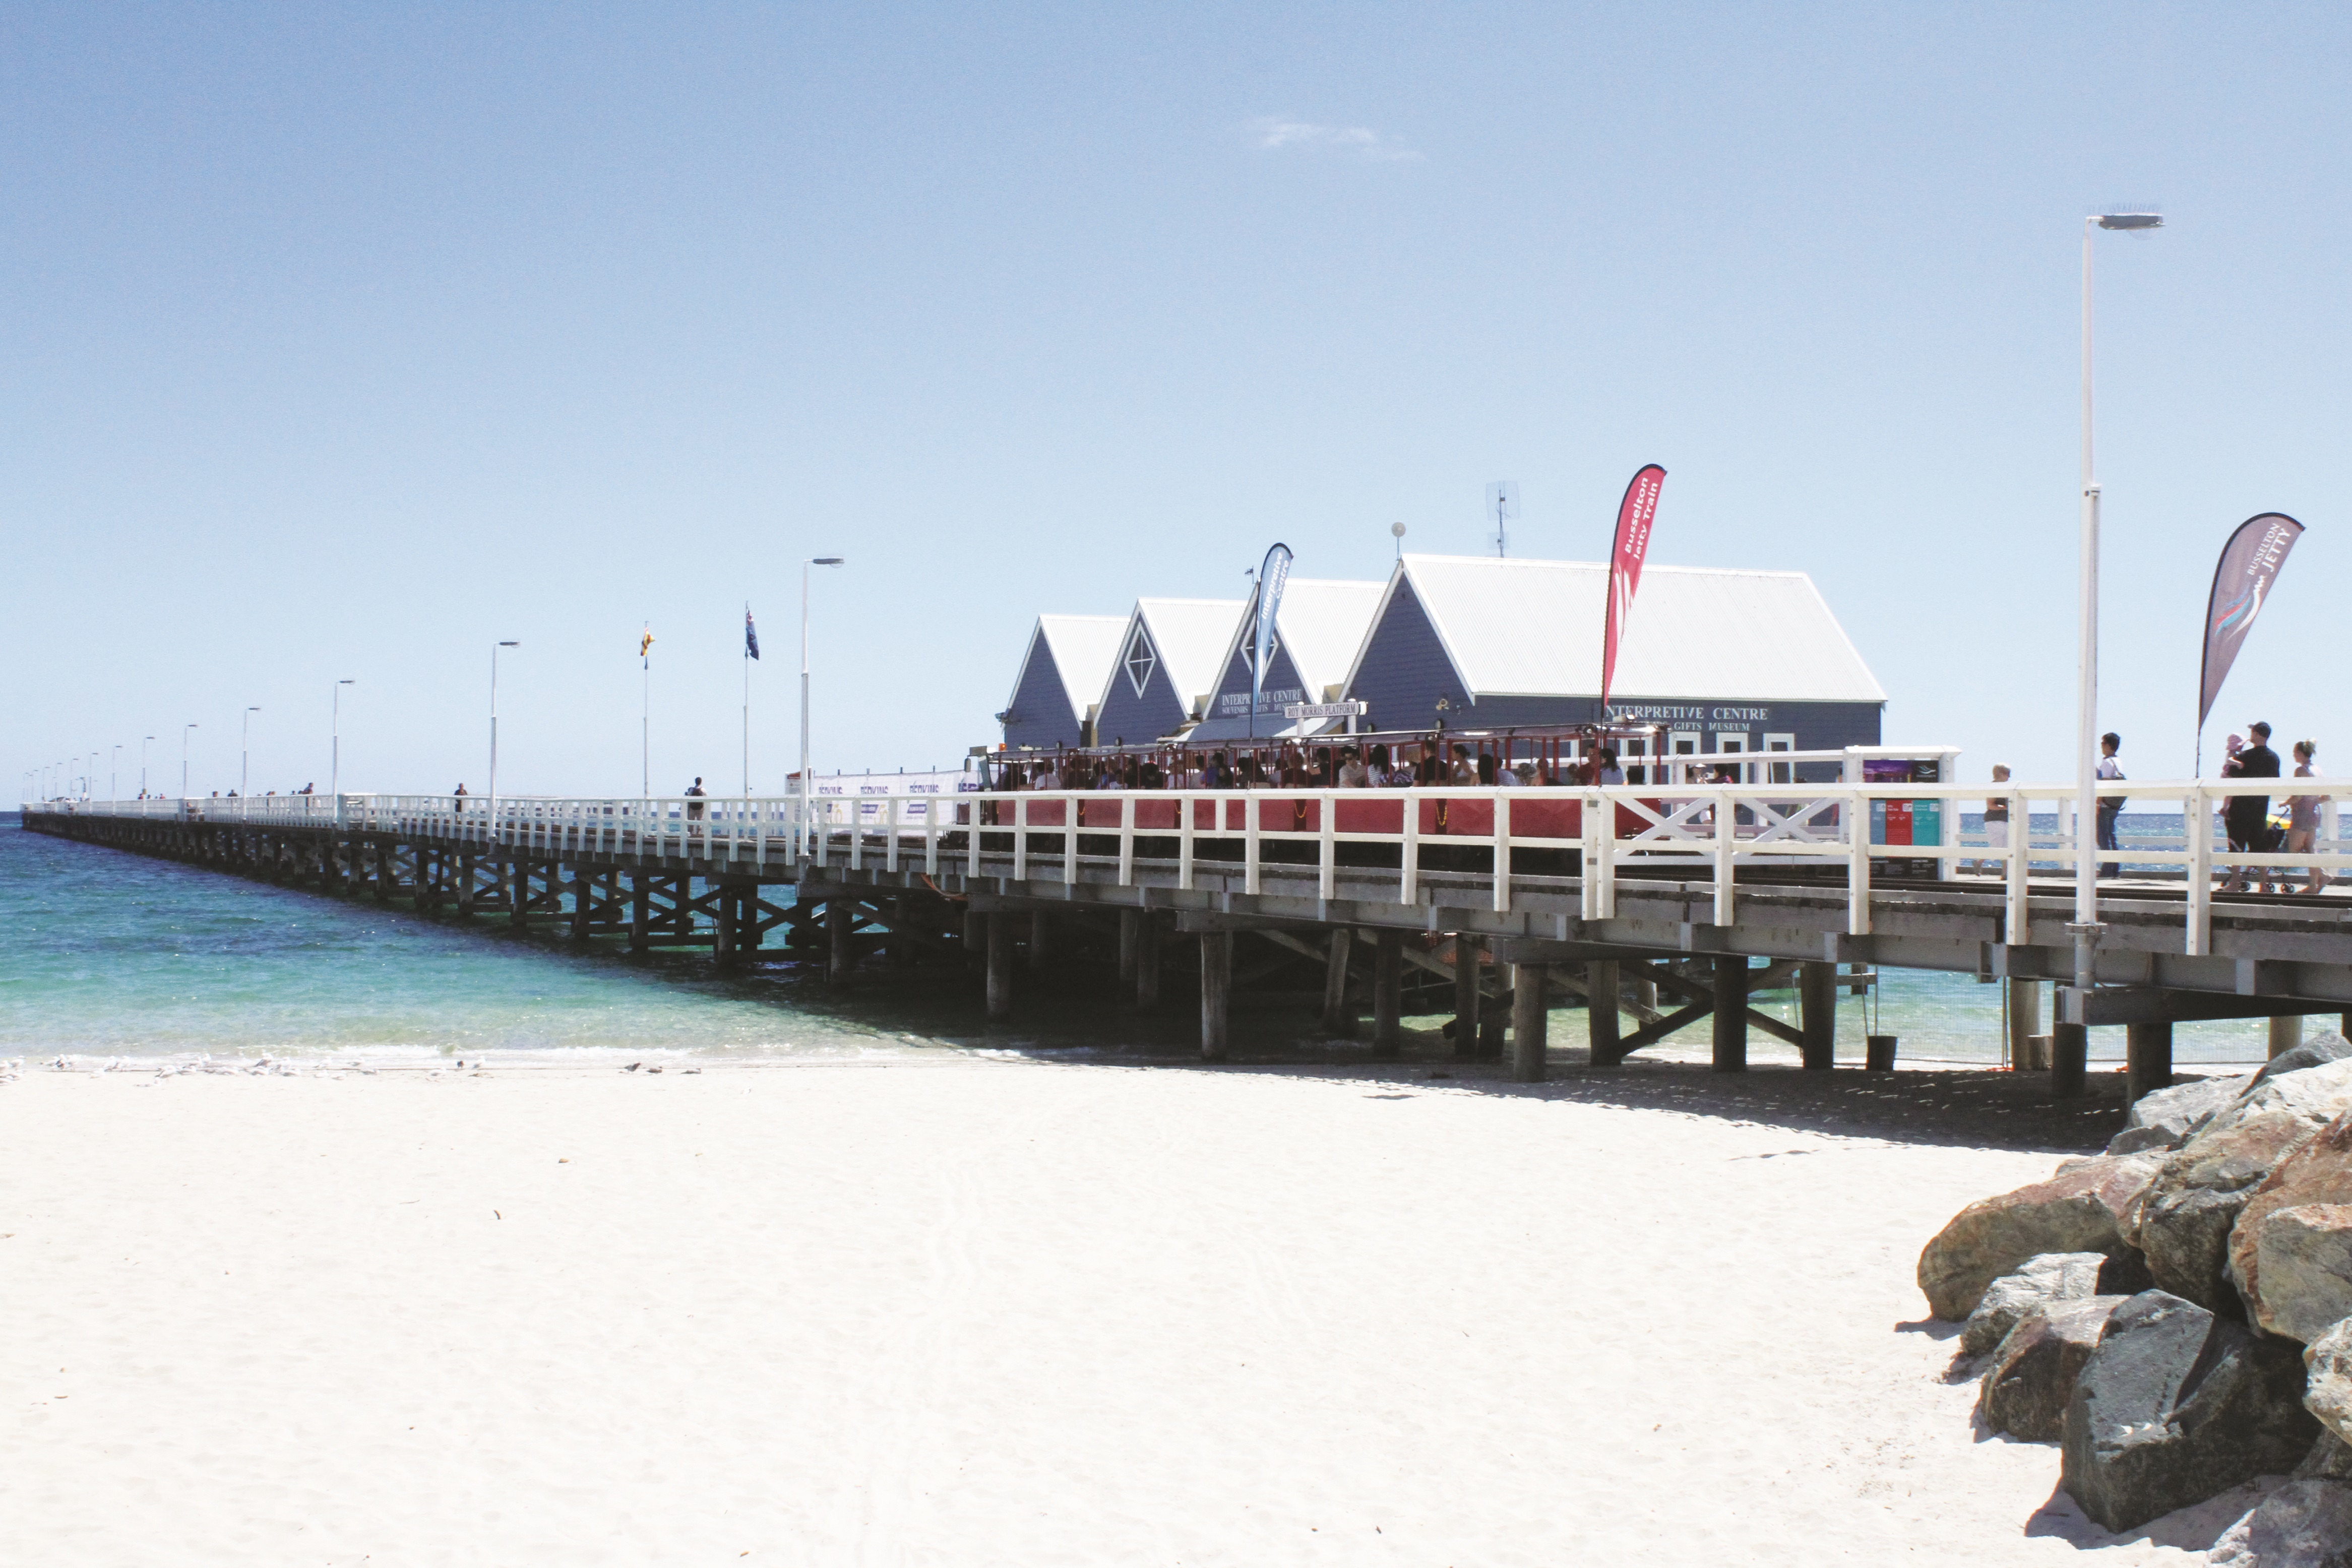 1-Day Tour from Perth: Margaret River + Busselton Jetty + Cape Leeuwin Lighthouse